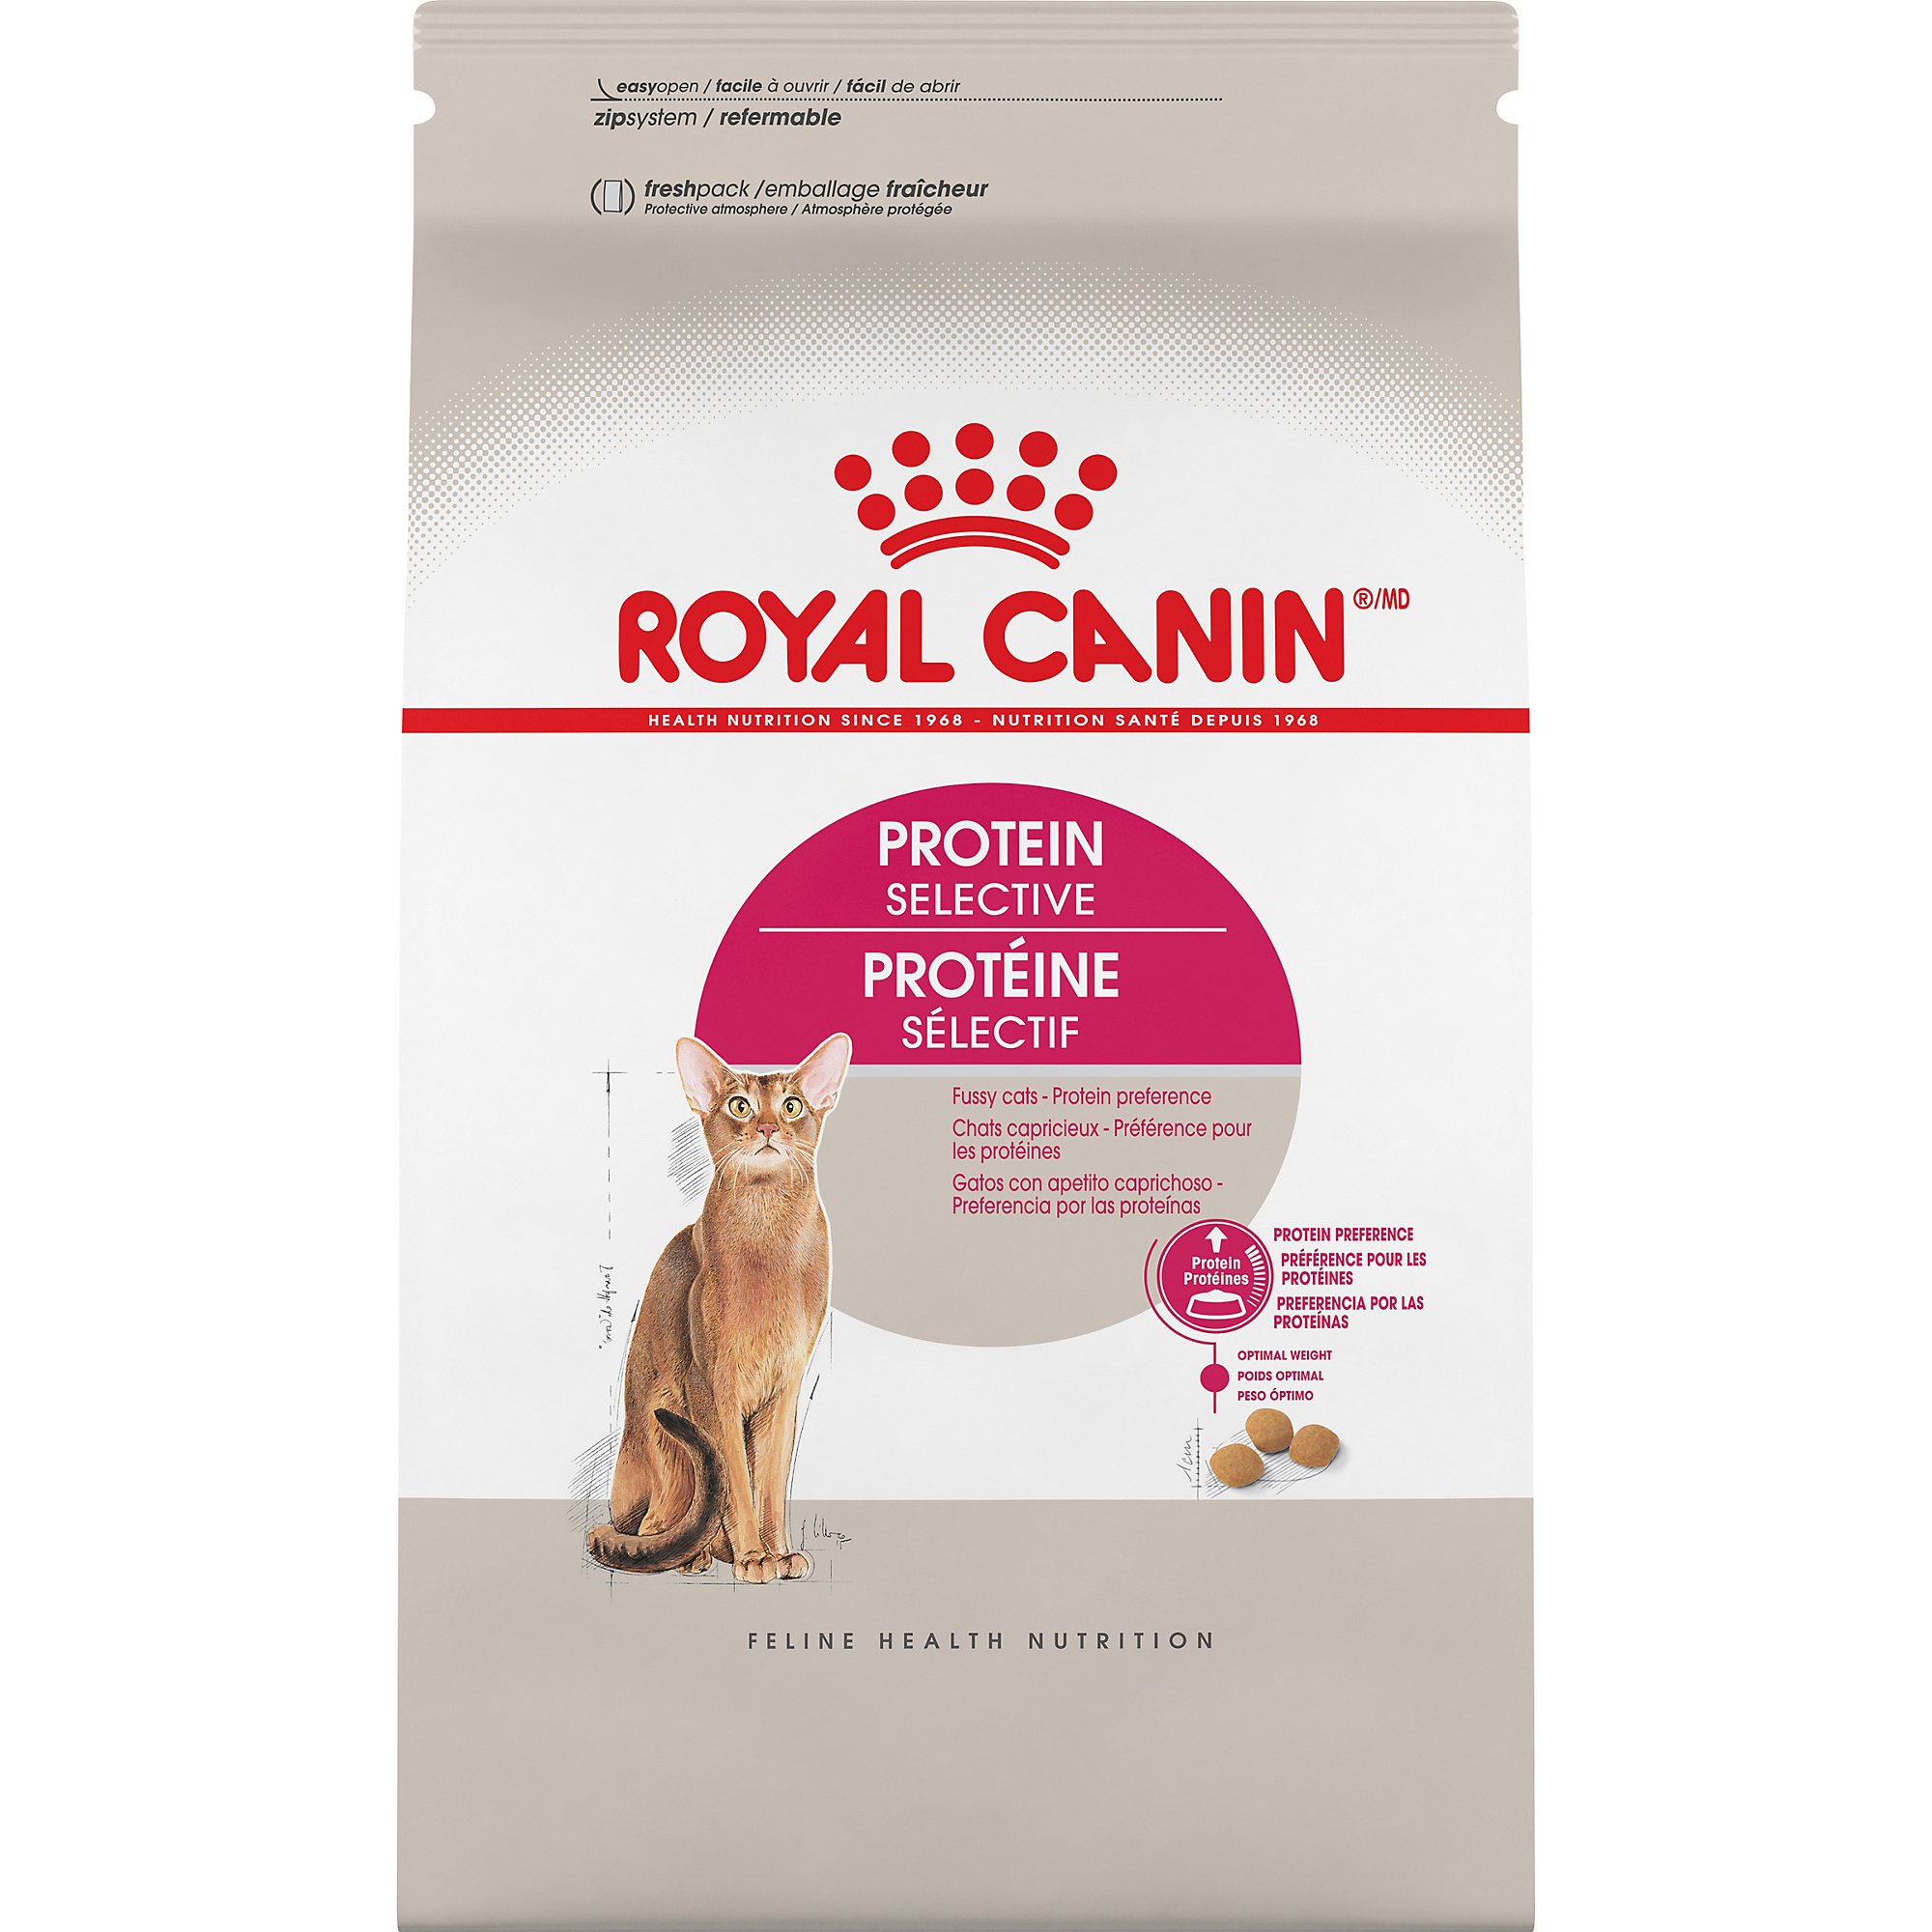 Royal Canin Feline Health Nutrition Selective 40 Protein Preference Dry